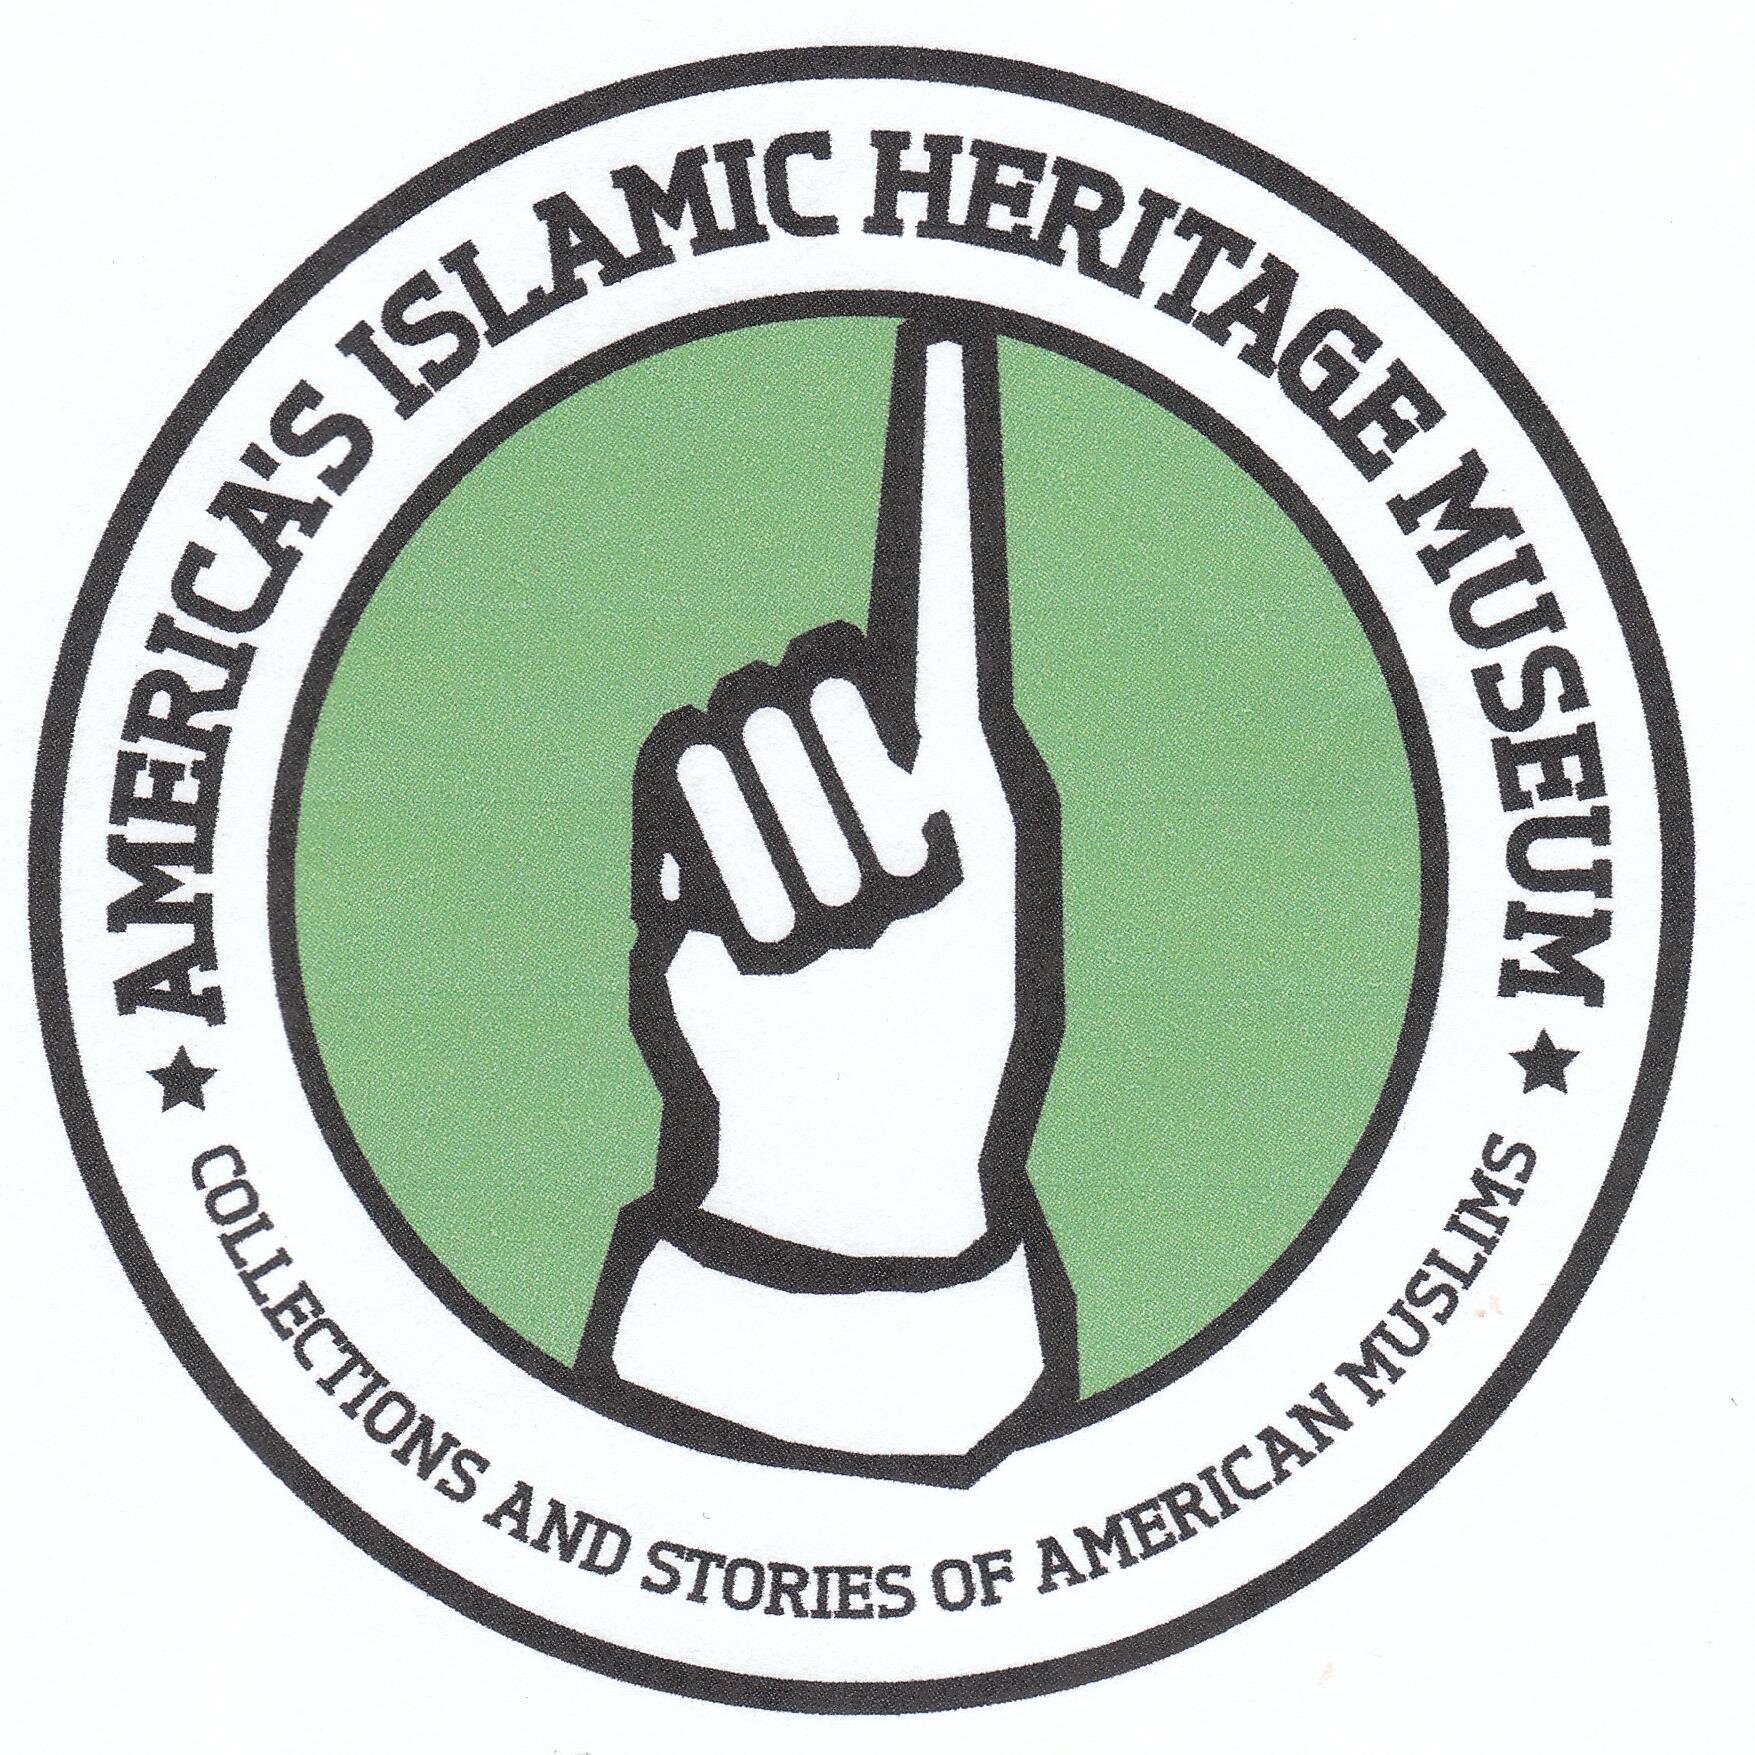 The Mission of America's Islamic Heritage Museum is to educate the American public about the history and contributions of Muslims in America